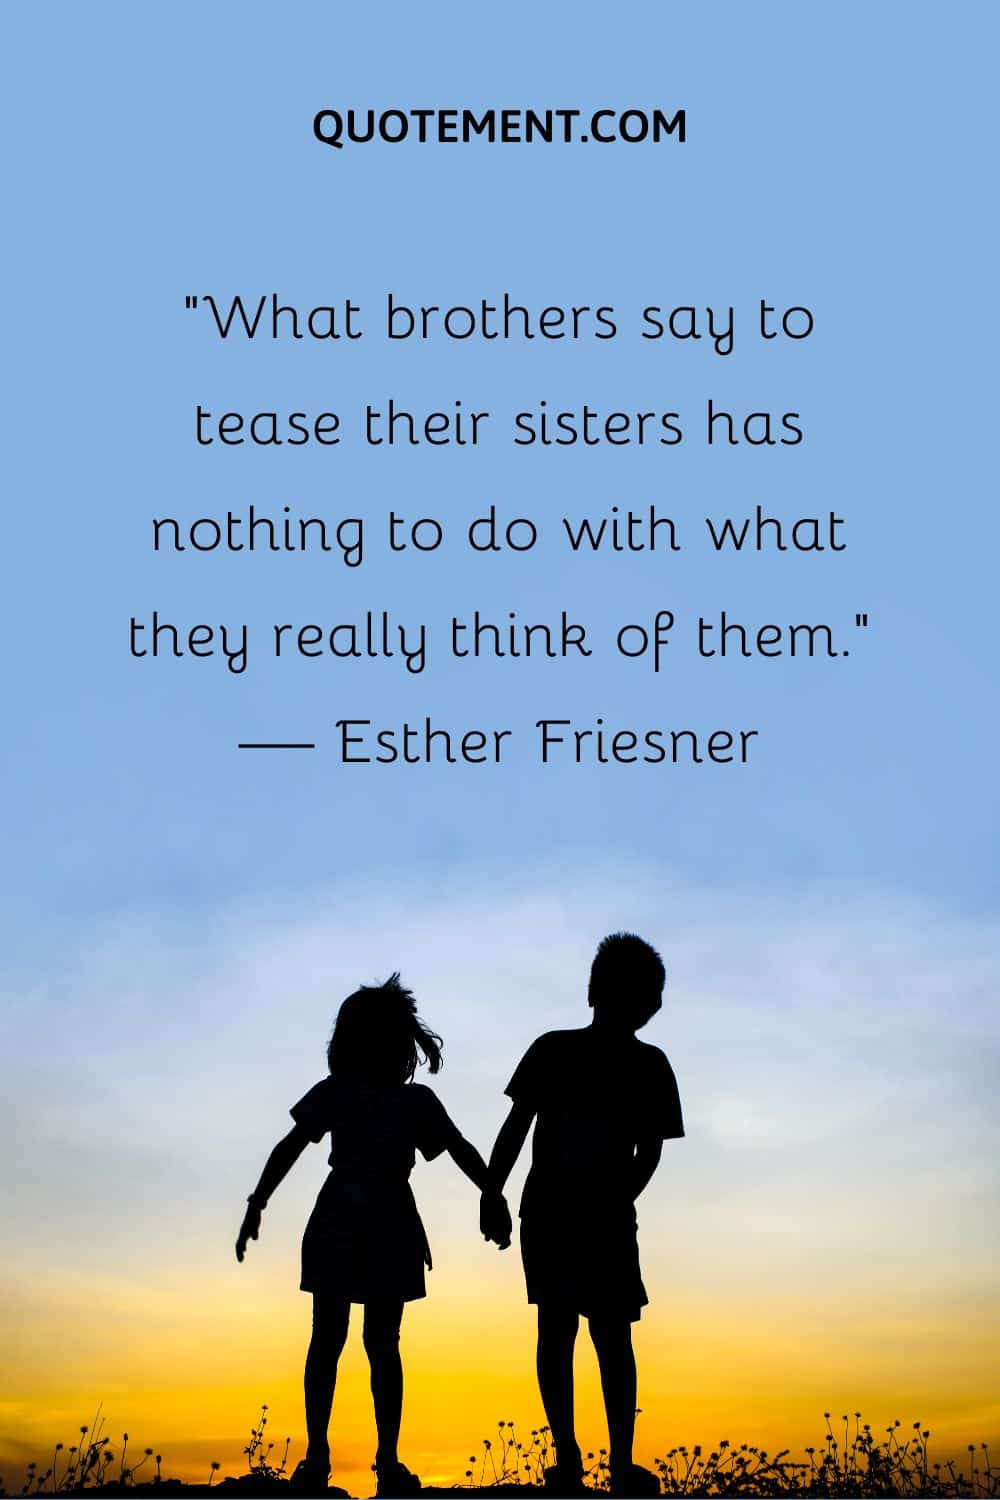 “What brothers say to tease their sisters has nothing to do with what they really think of them.” — Esther Friesner